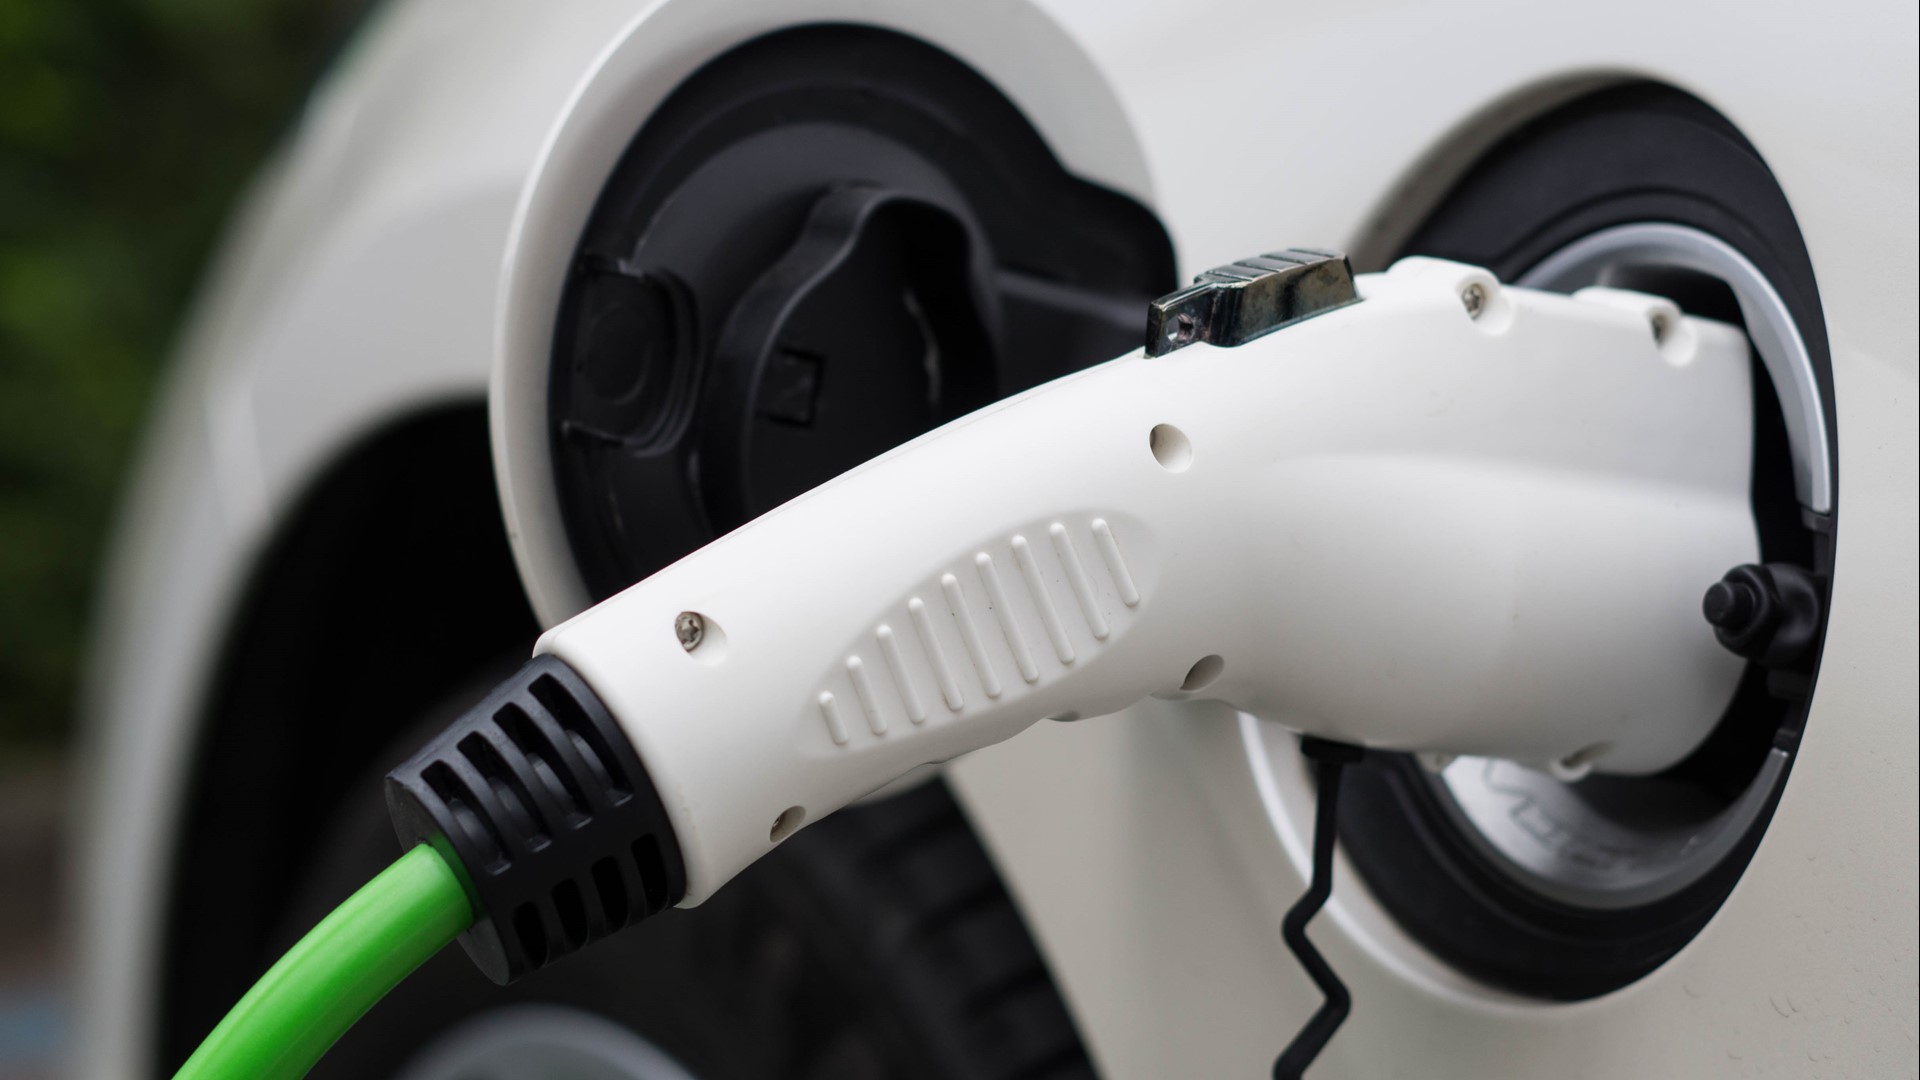 The state of Georgia is looking for ways to expand the number of electric vehicle stations along our roads.